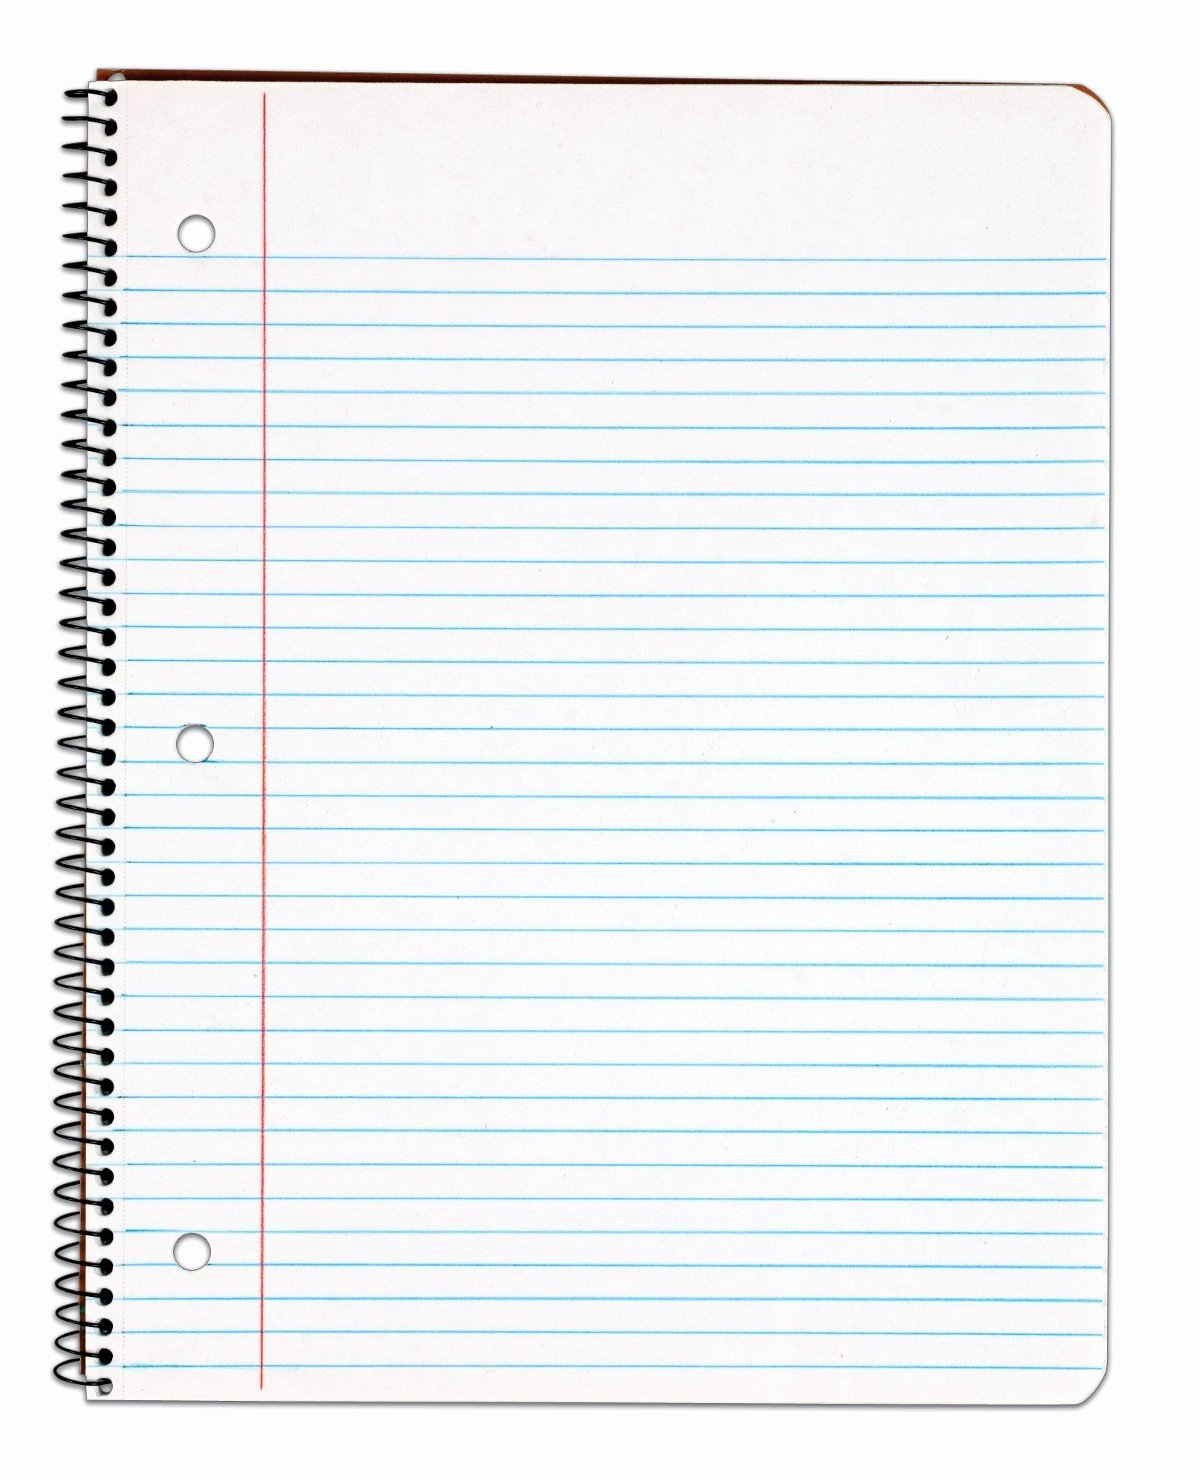 Lined College Ruled Paper Lovely Do You Really Have to Use College Ruled Paper when You’re